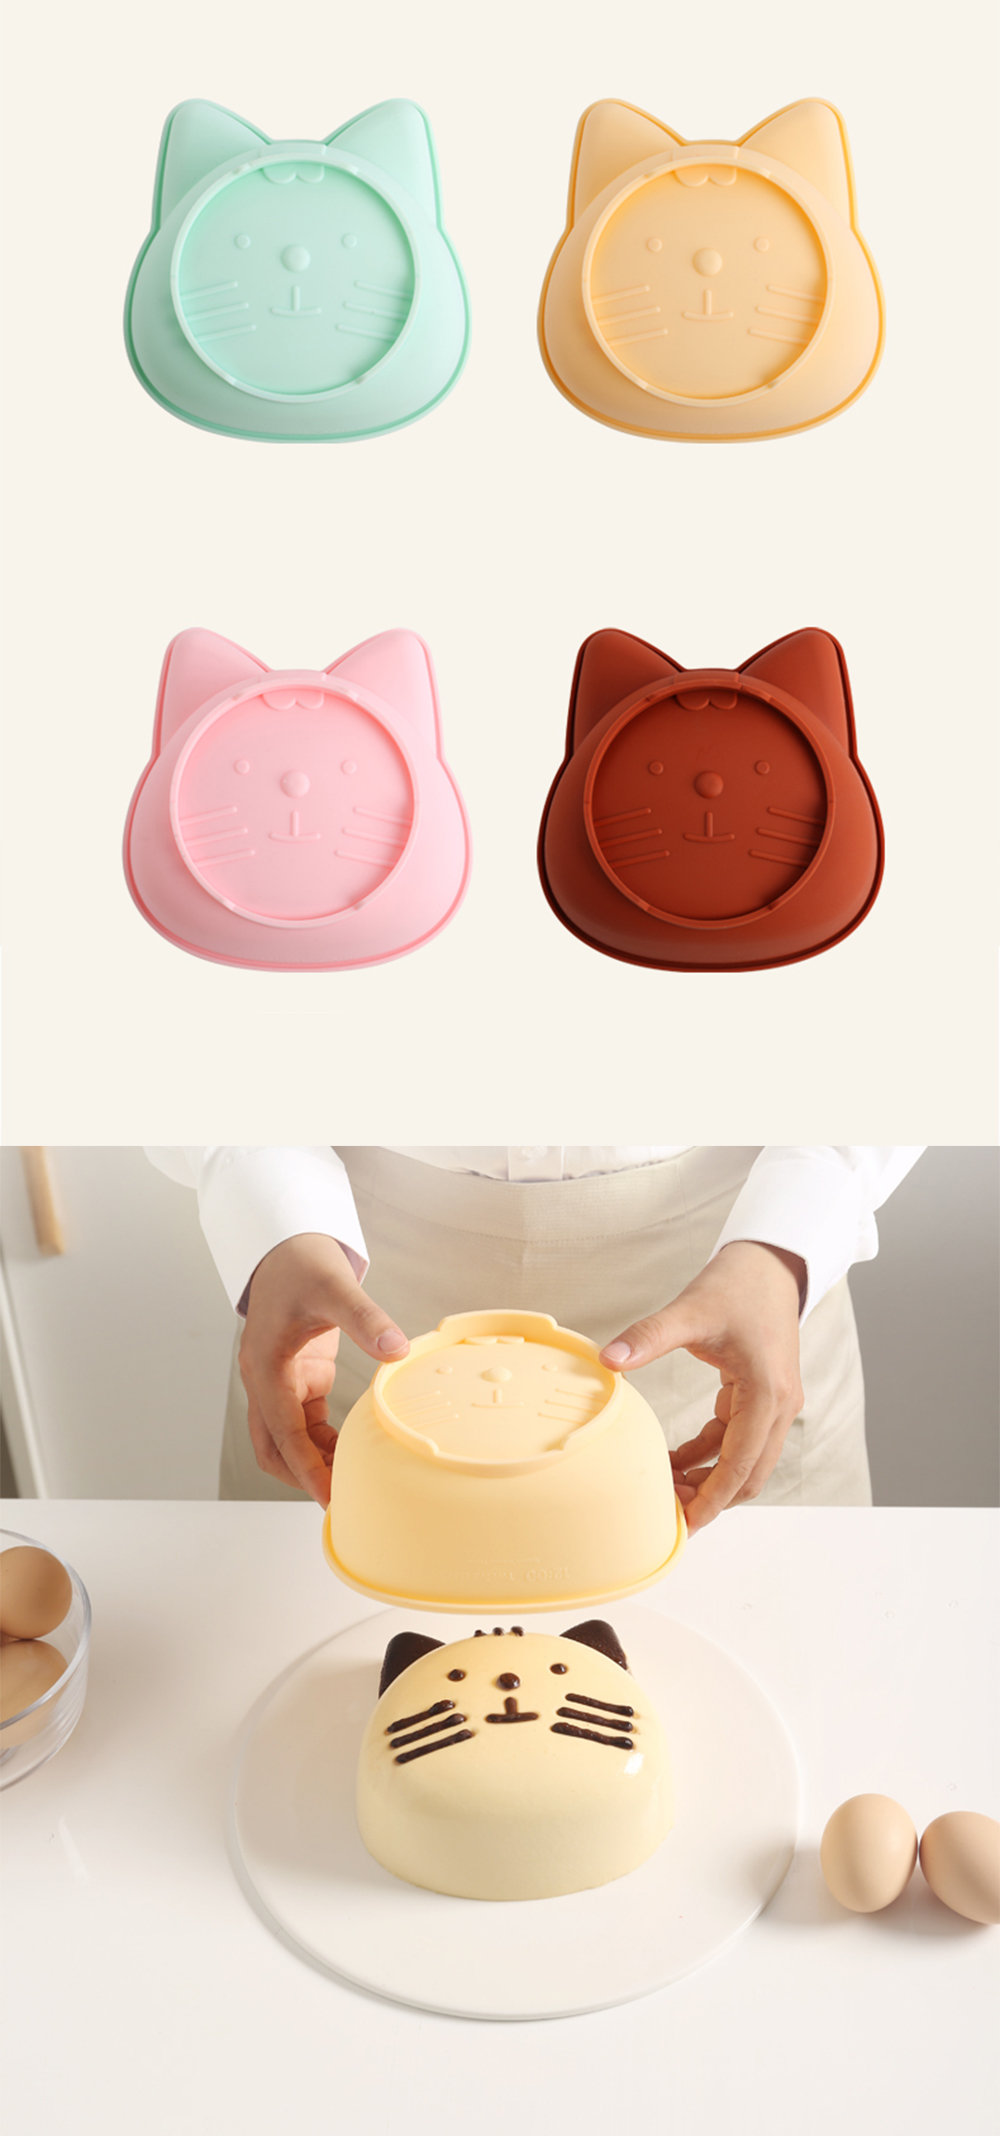 3D Cat/Dog Silicone Mold Fondant Mousse Cake Decorating Mould Chocolate  Gumpaste Pudding Baking Mold,Soap Candle Clay Stencils Making Form Mold,Animal  Shape Plaster Resin Mold,DIY Bakeware Baking Pan : Amazon.co.uk: Home &  Kitchen